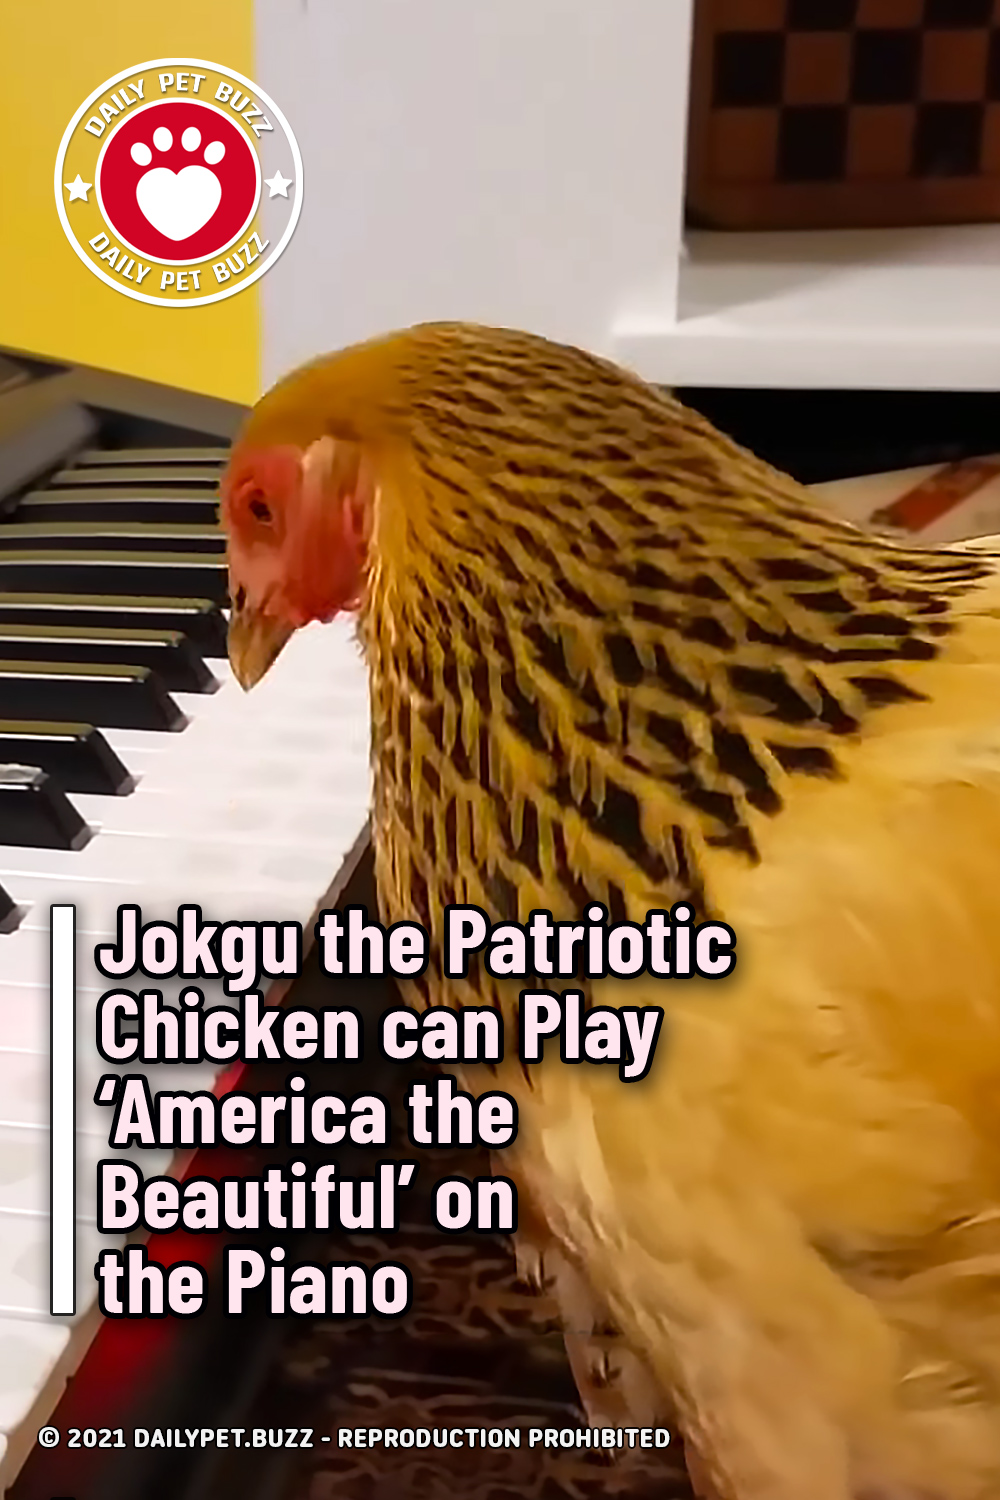 Jokgu the Patriotic Chicken can Play ‘America the Beautiful’ on the Piano